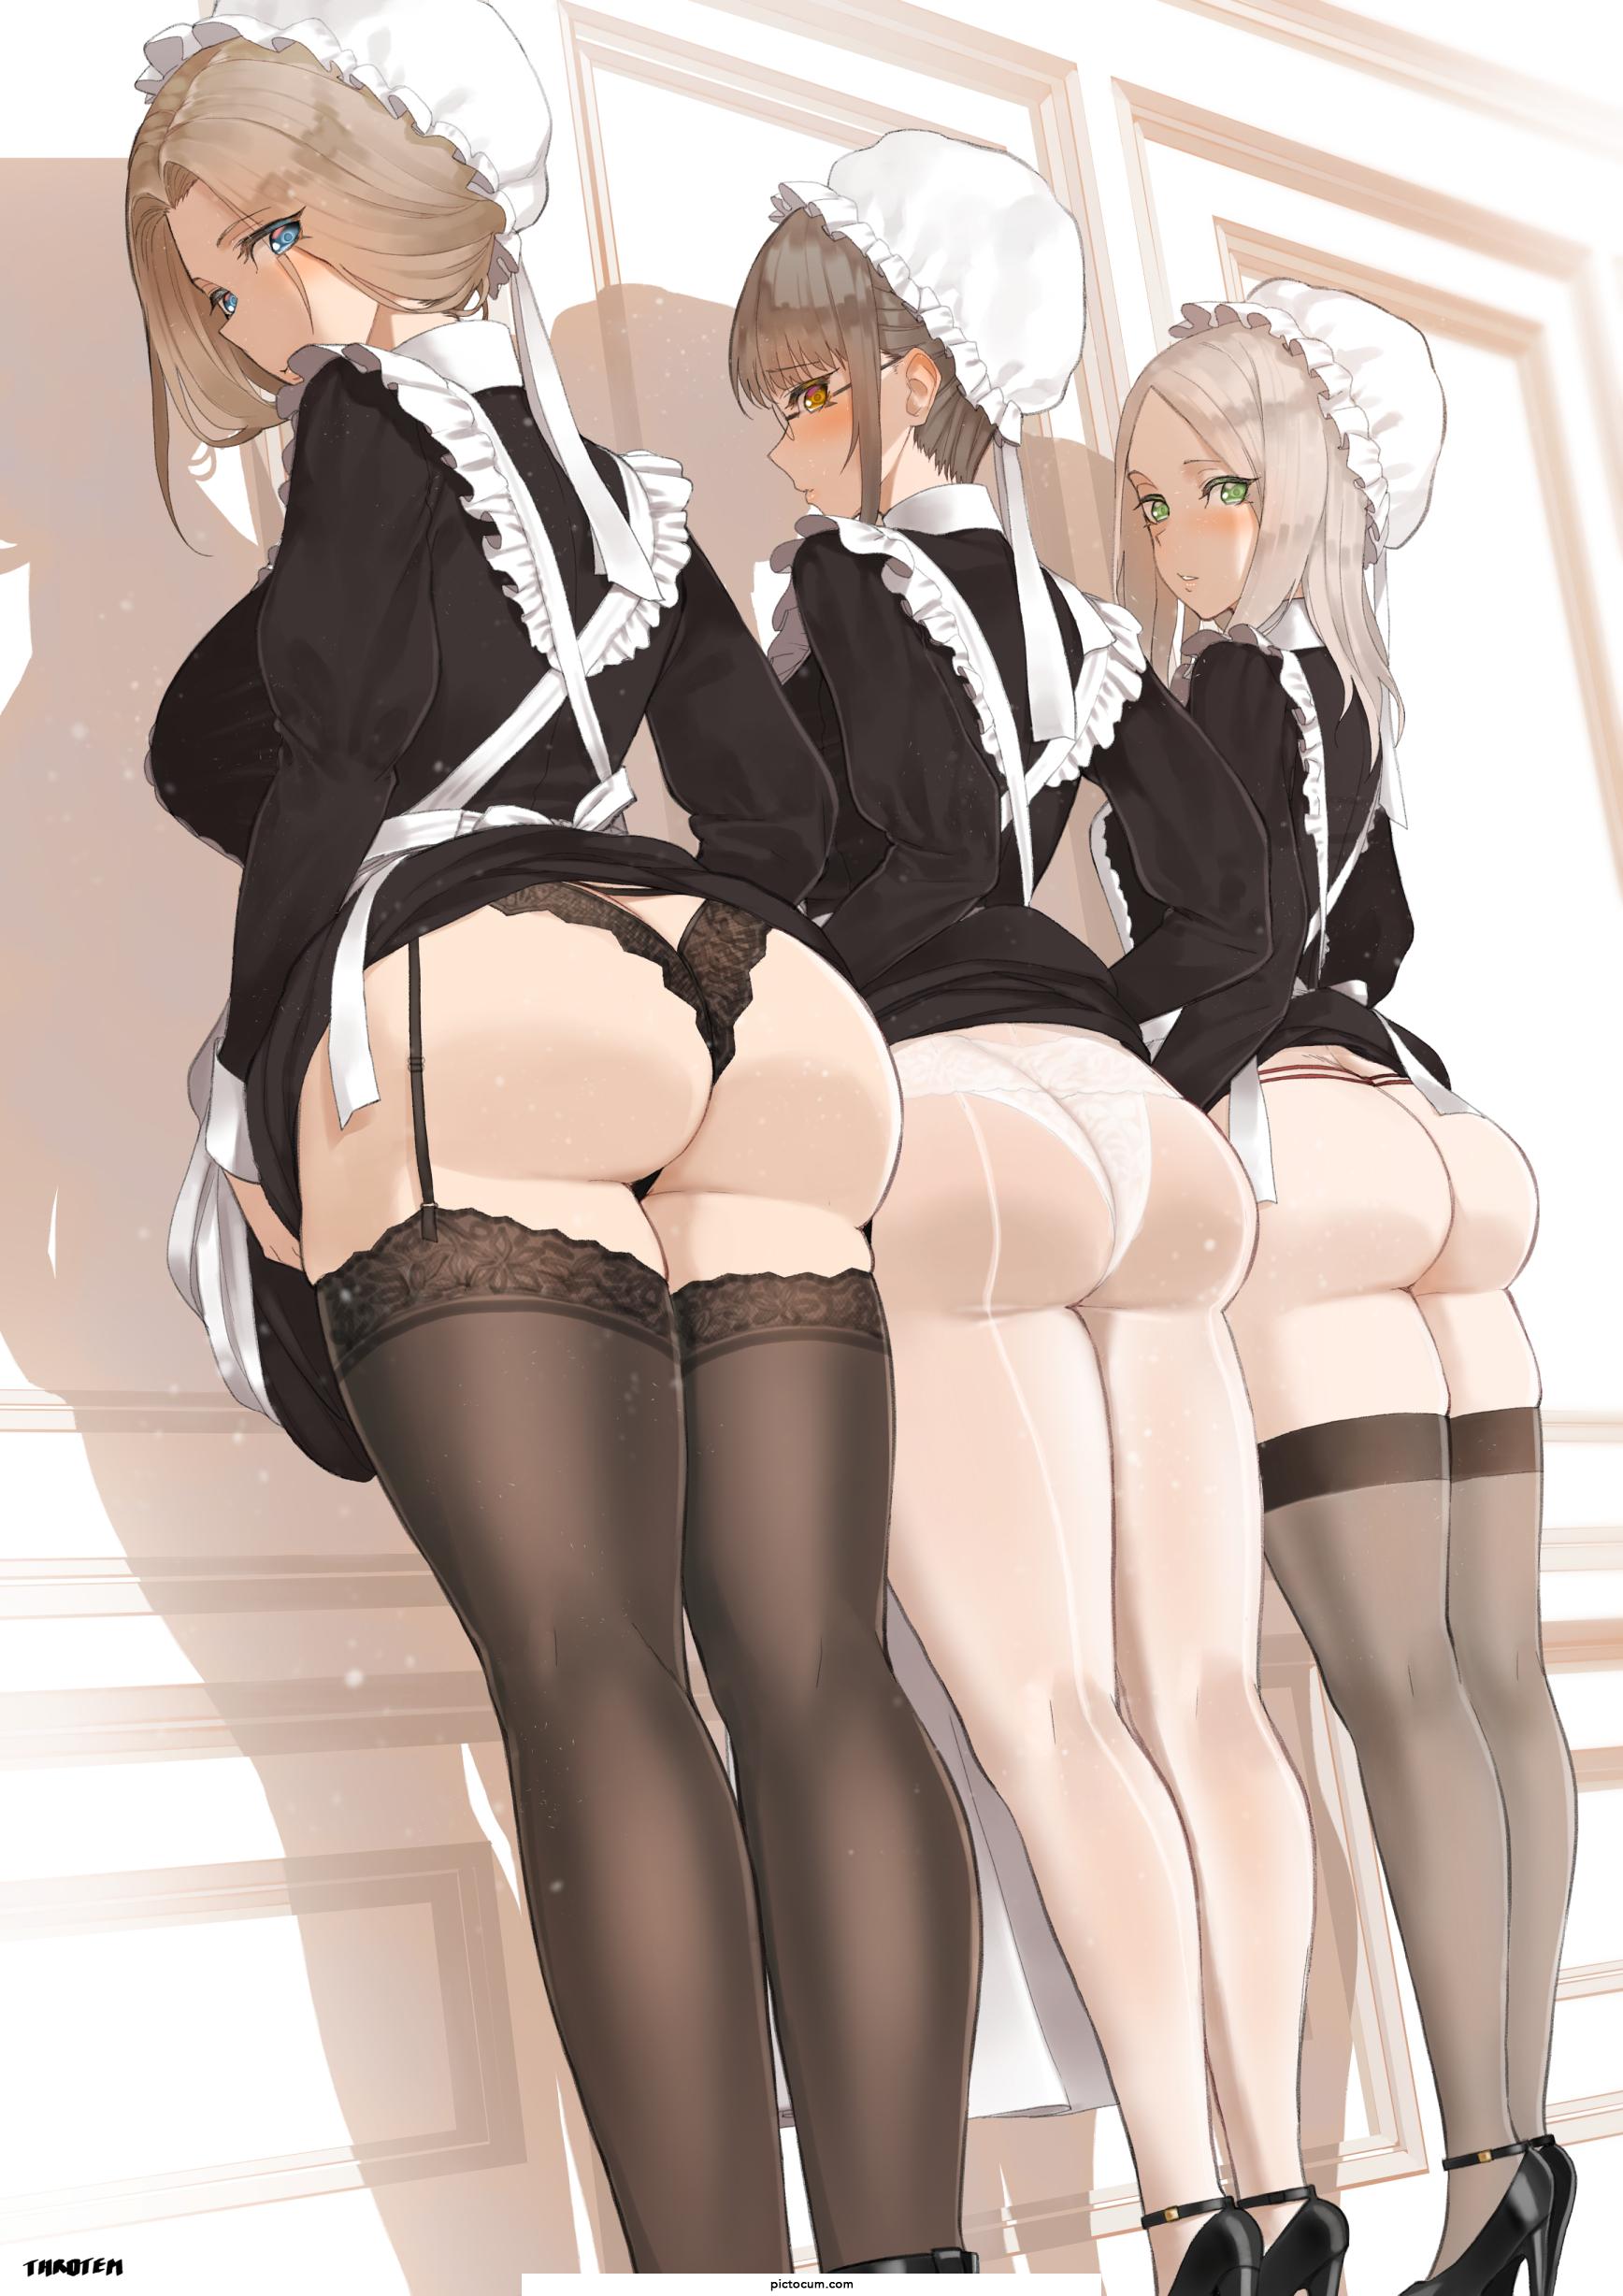 Maids lined up